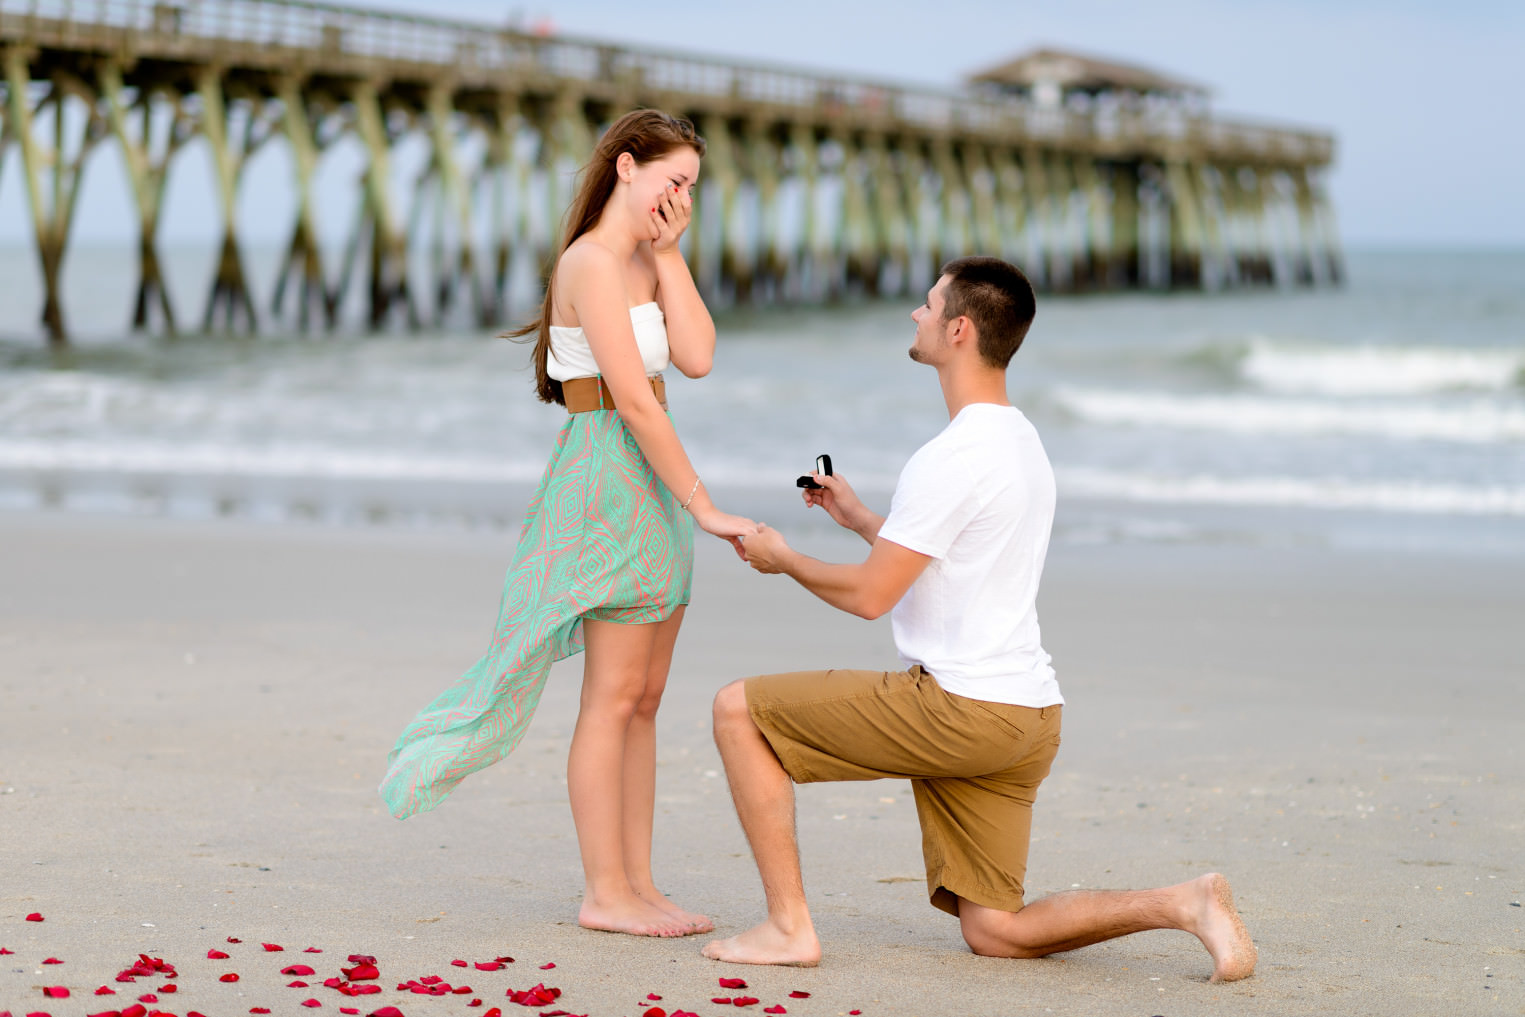 https://www.ryansmithphotography.com/wp-content/uploads/2013/09/engagement-proposal-myrtle-beach-state-park-young-couple009-1525x1017.jpg